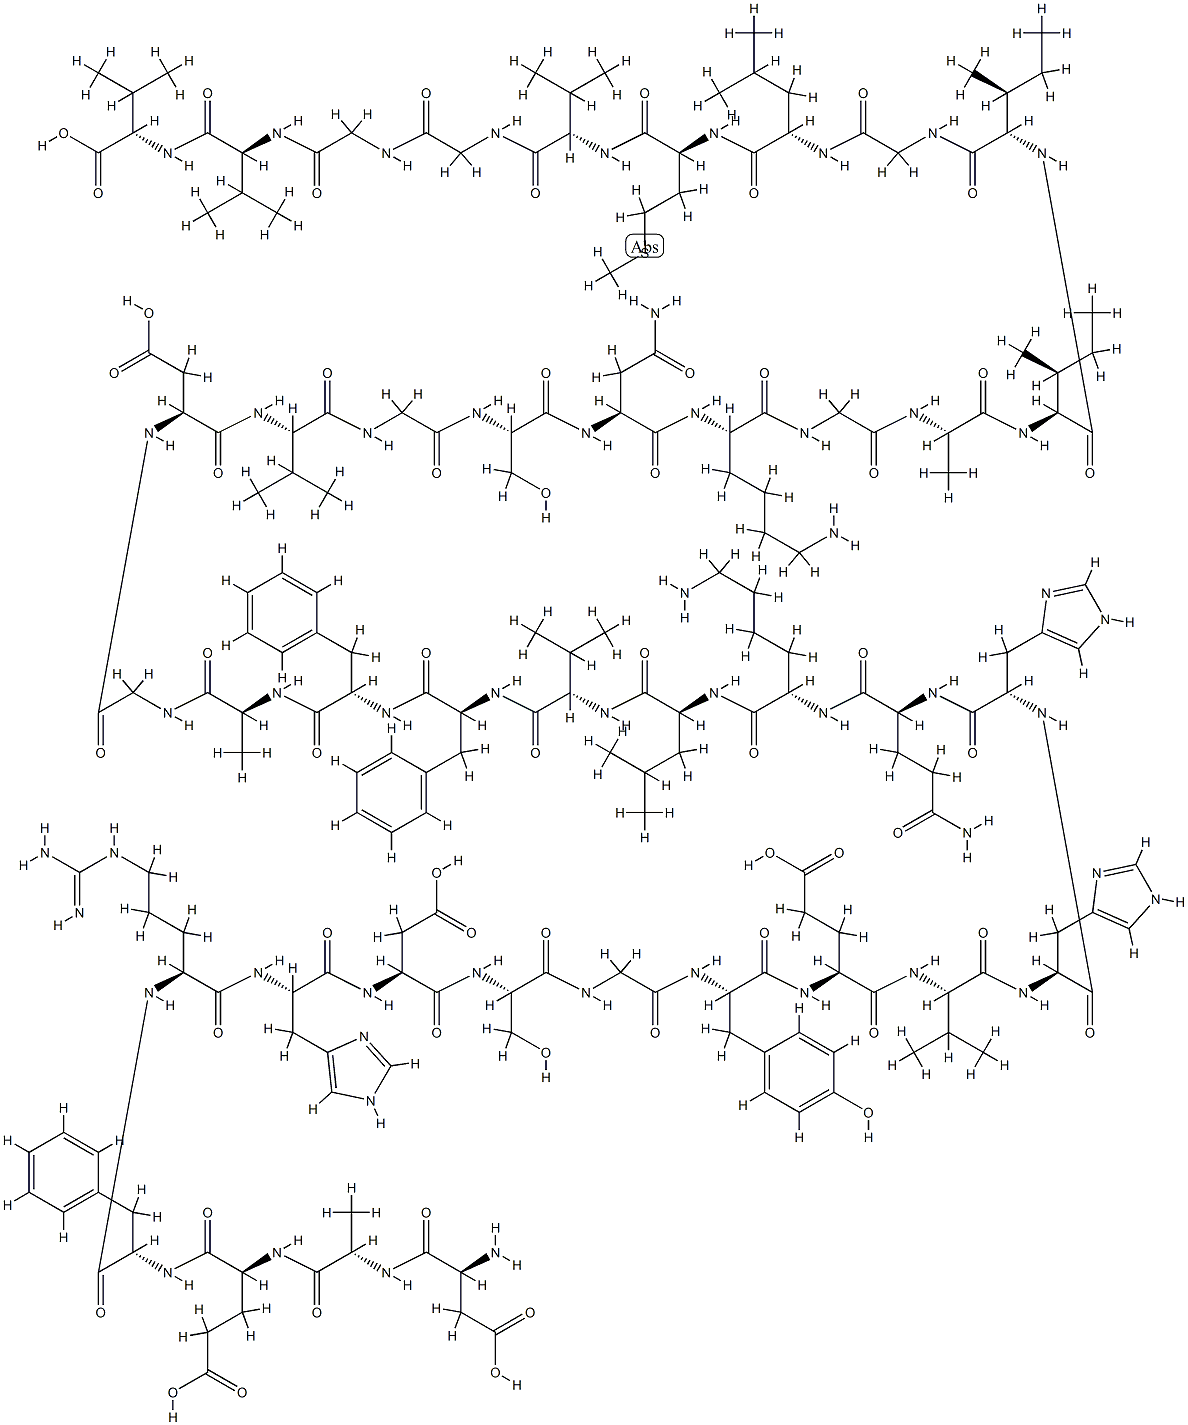 (GLY22)-AMYLOID Β-PROTEIN (1-40) 结构式